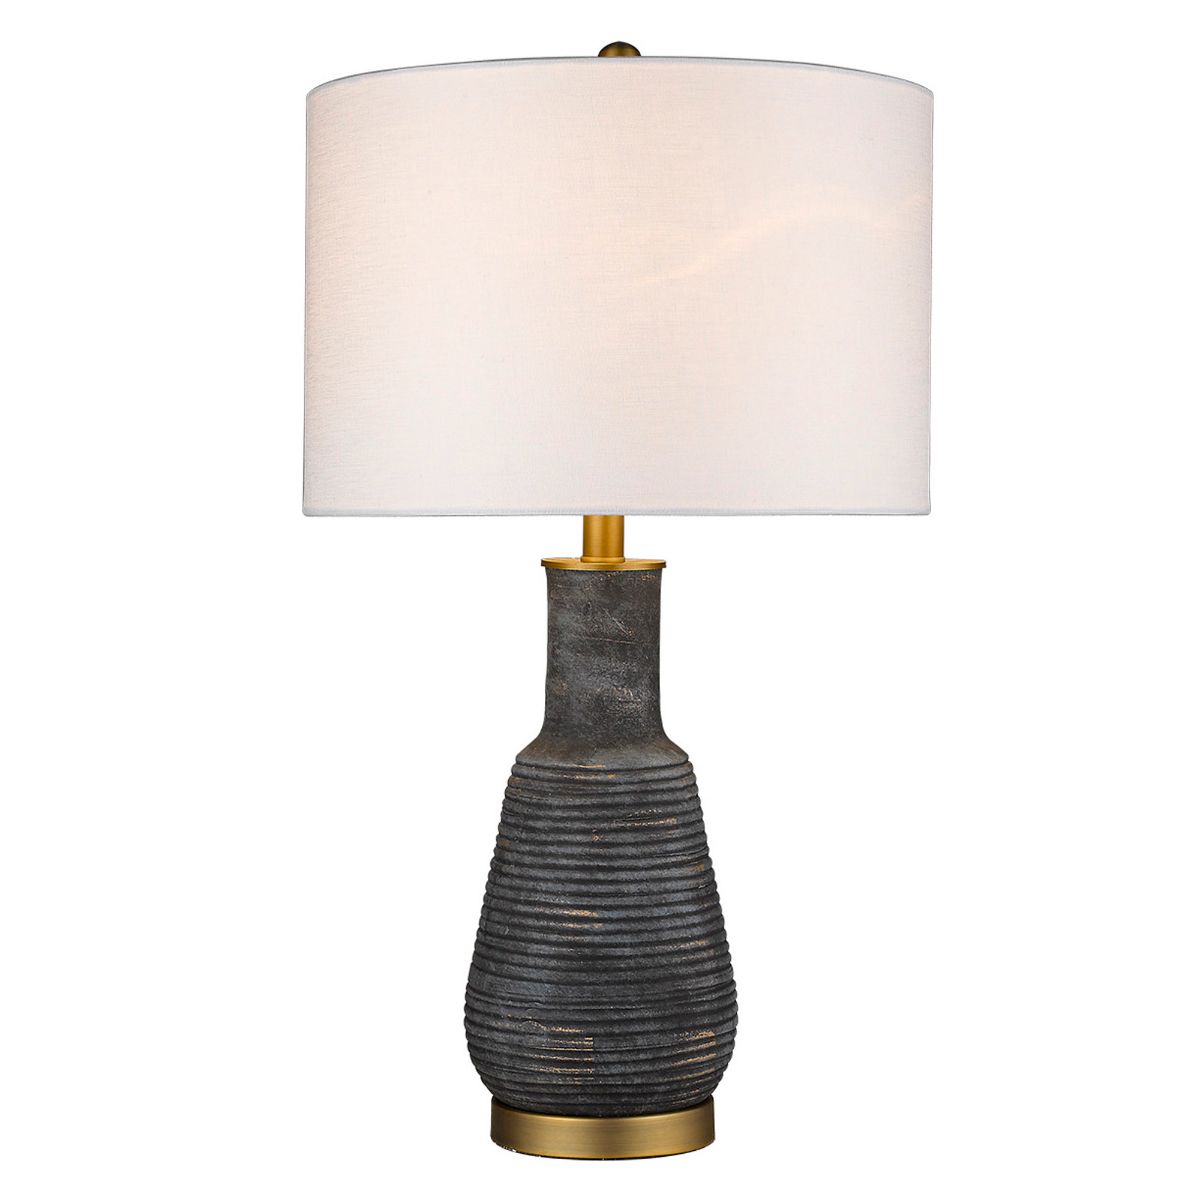 Trend Home 1 Light Table Lamp Rustic Iron Ceramic Body and Brass Accents